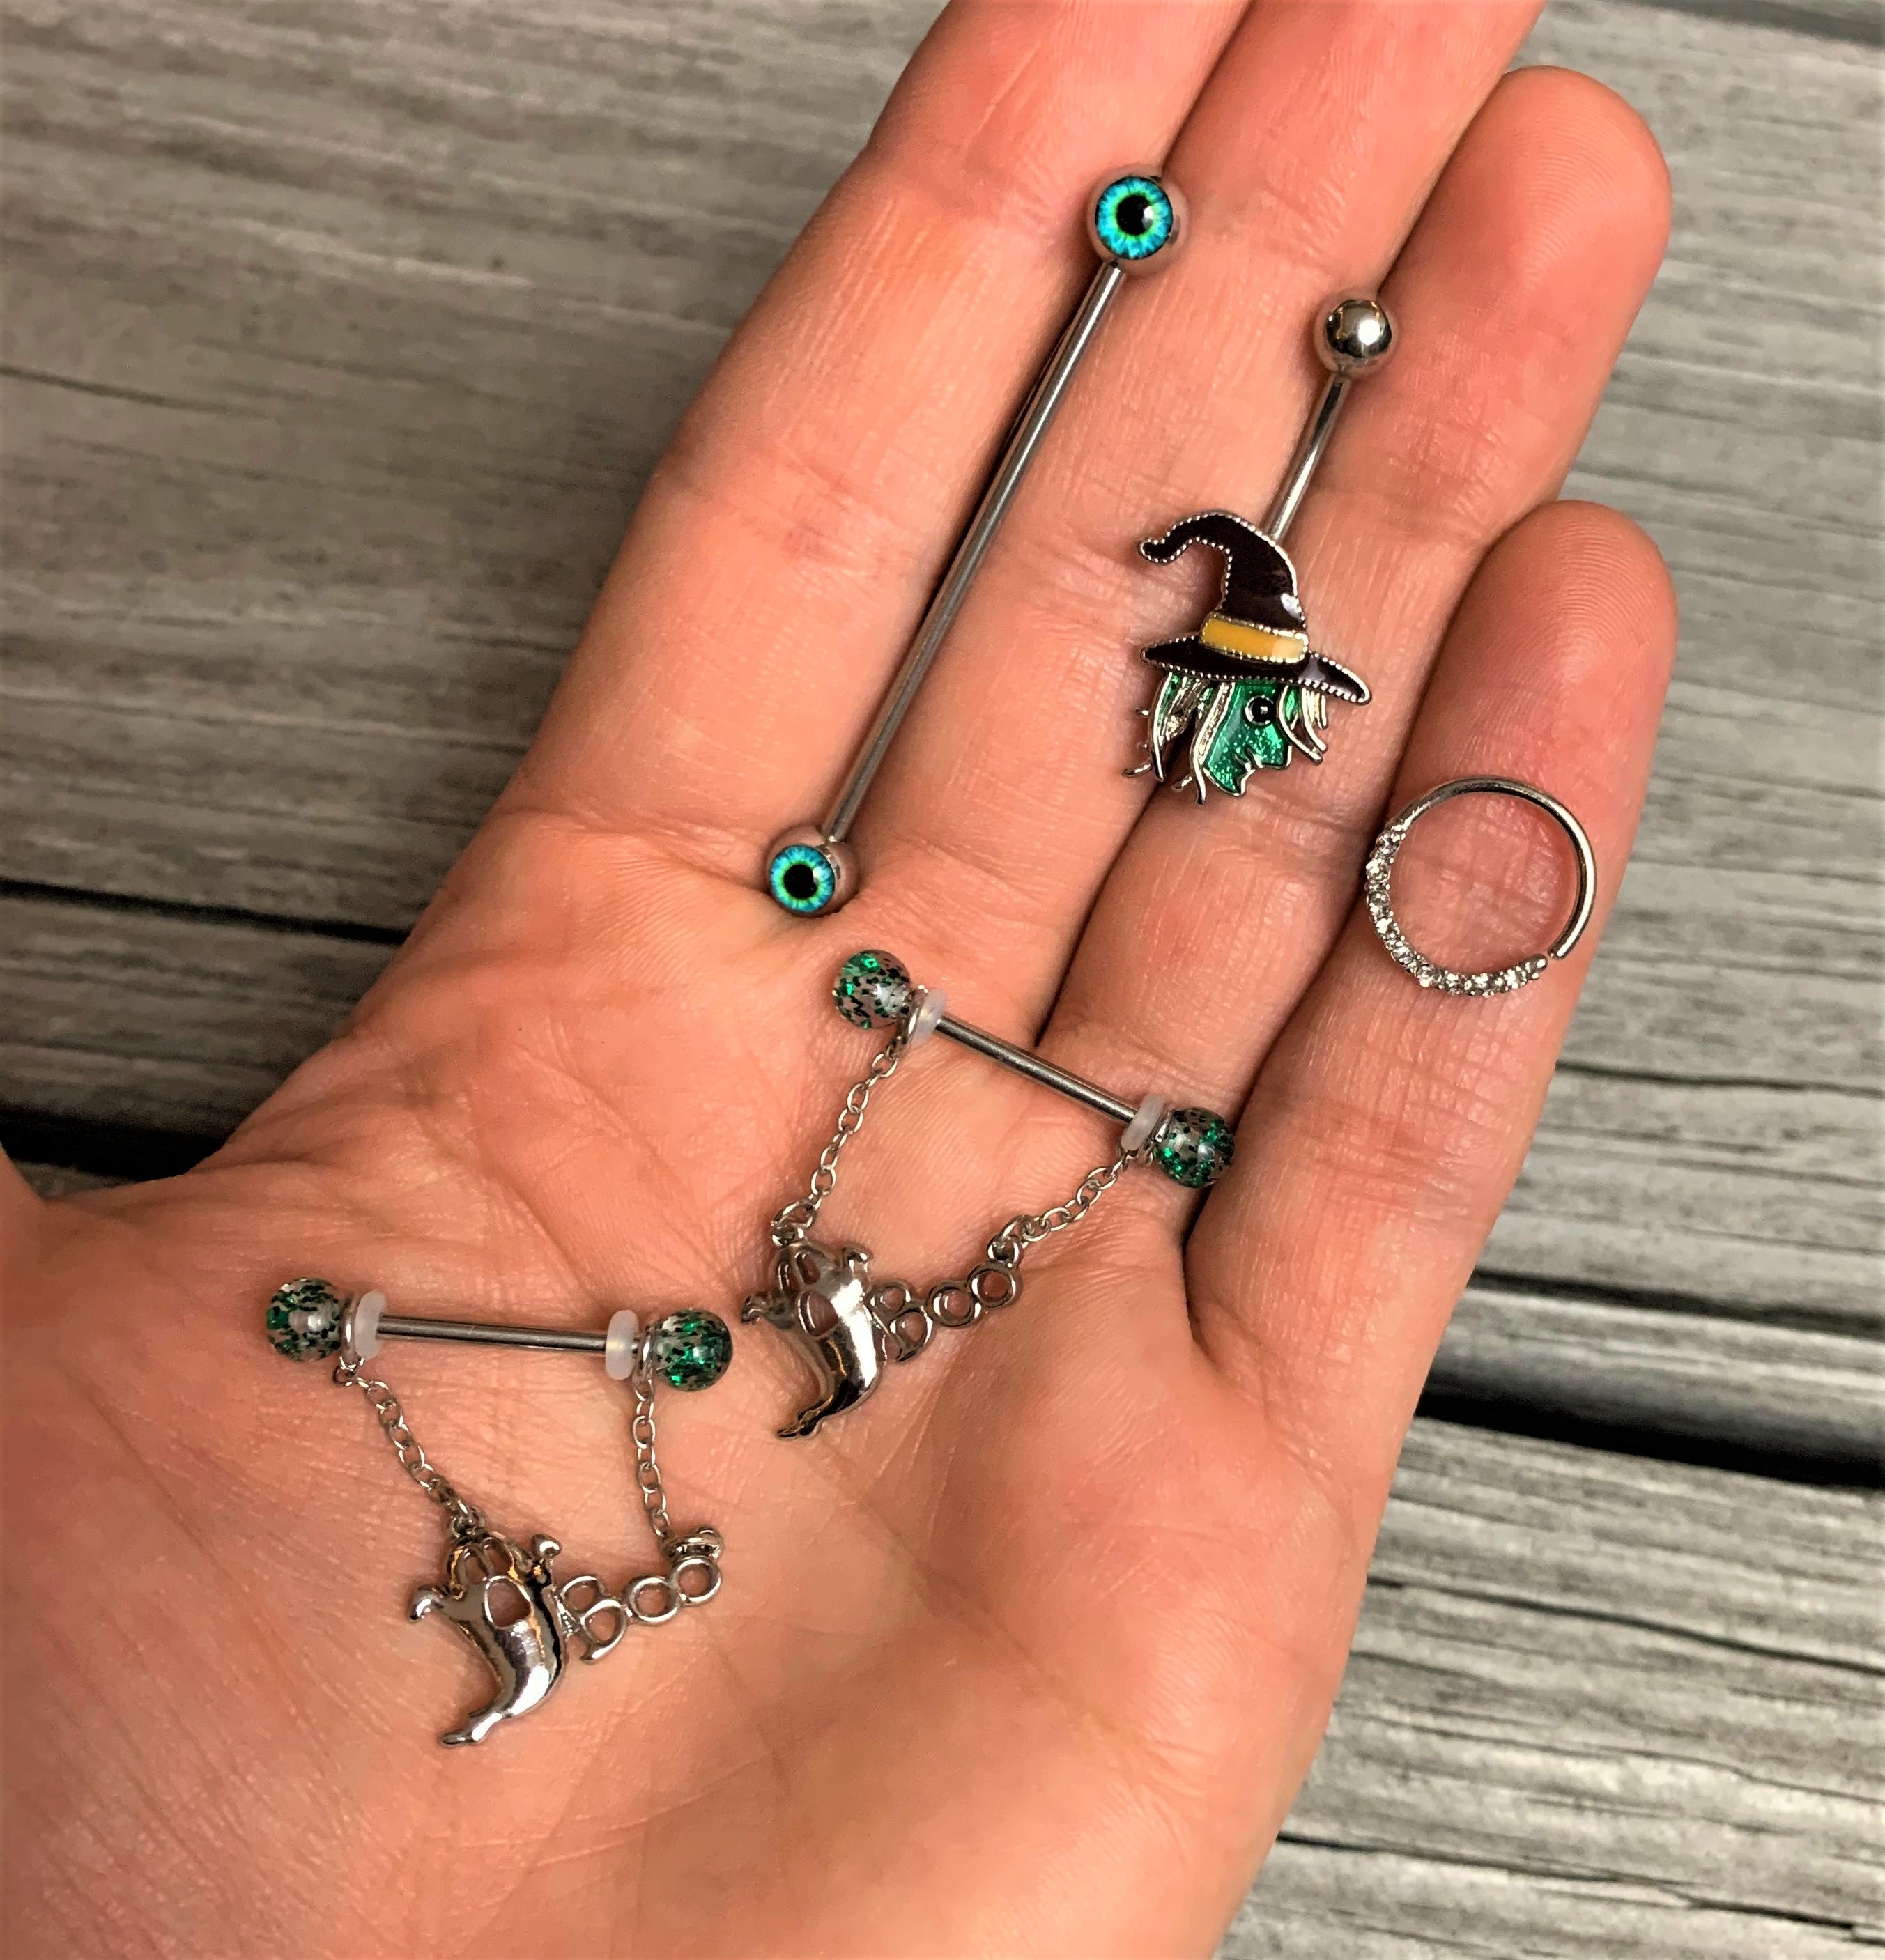 Ghastly Green Woods Witch Halloween Belly Ring